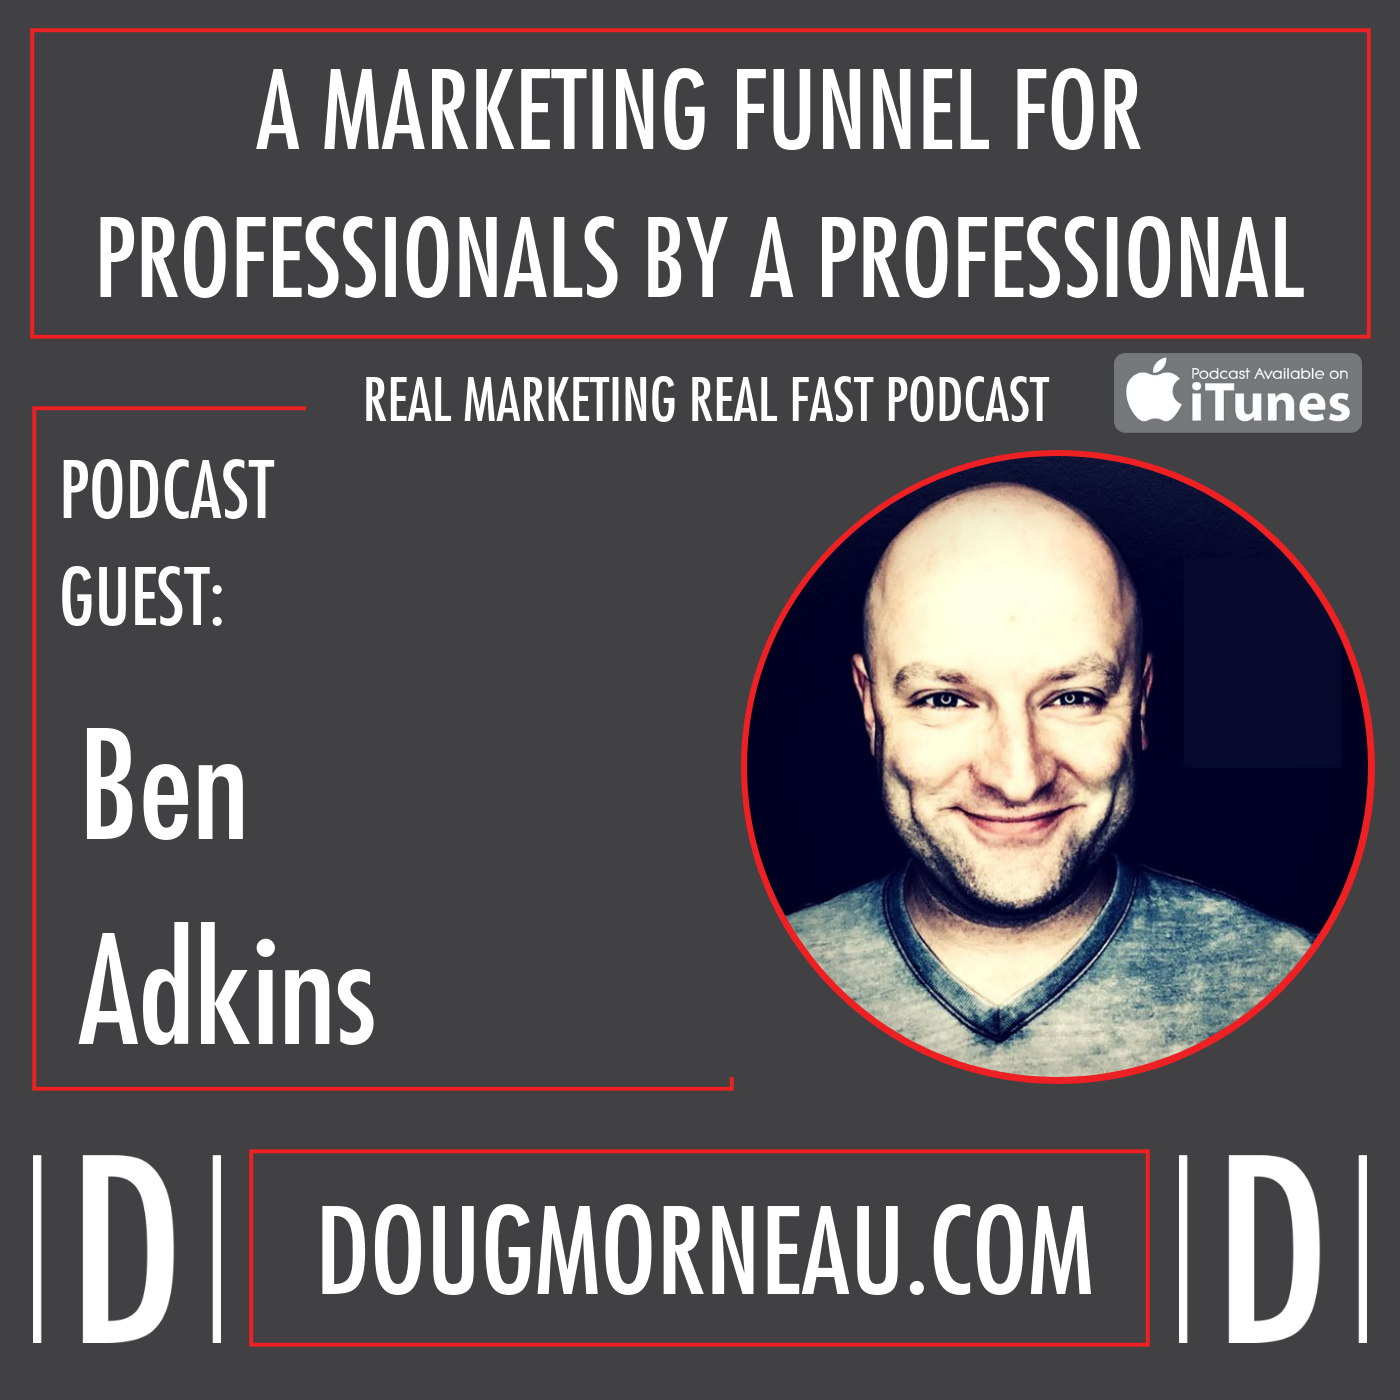 A MARKETING FUNNEL FOR PROFESSIONALS BY A PROFESSIONAL BEN ADKINS - DOUG MORNEAU - REAL MARKETING REAL FAST PODCAST